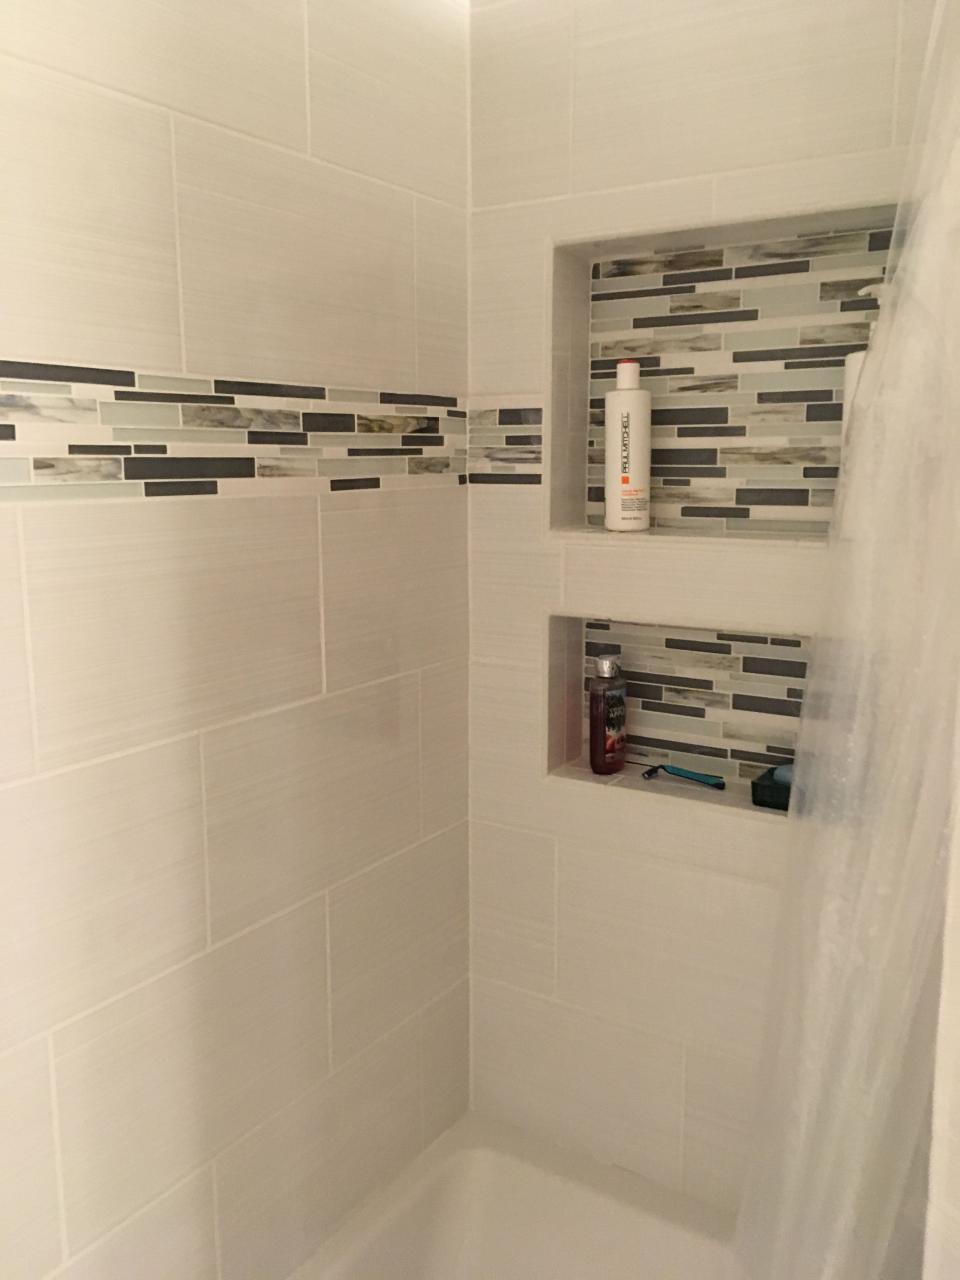 Used Lowes Blairlock white tile for our shower with white grout and